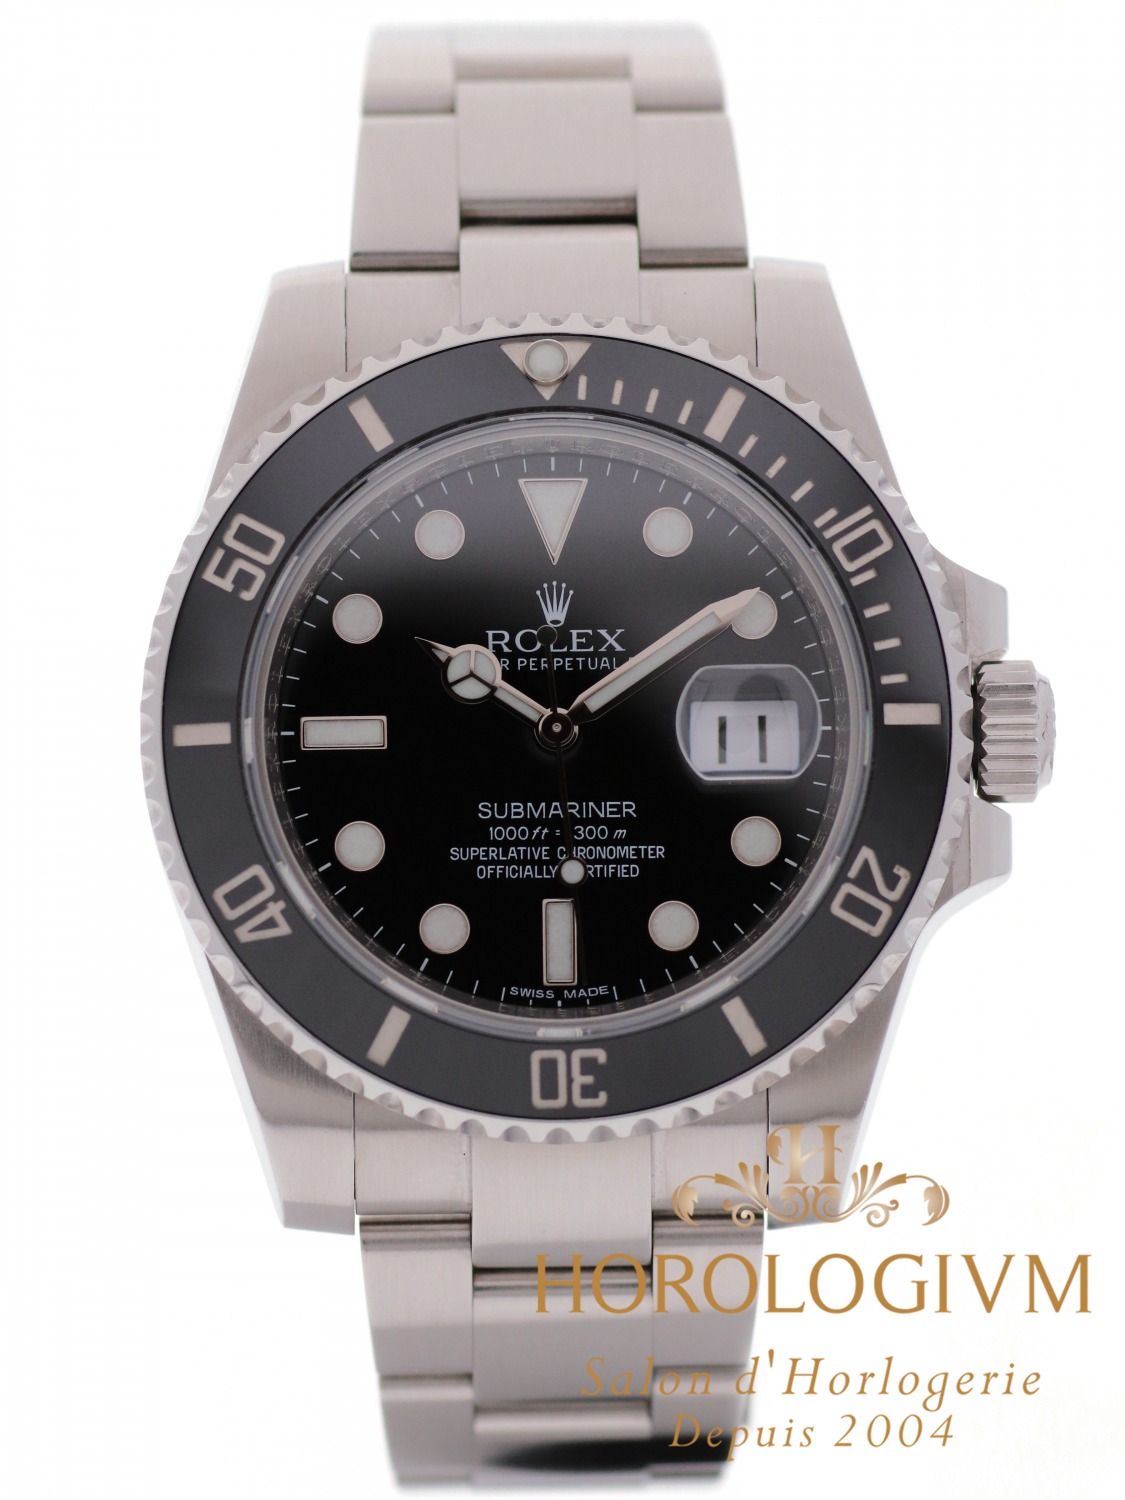 Rolex Oyster Perpetual Date Submariner 40MM watch, silver (case) and black (bezel)